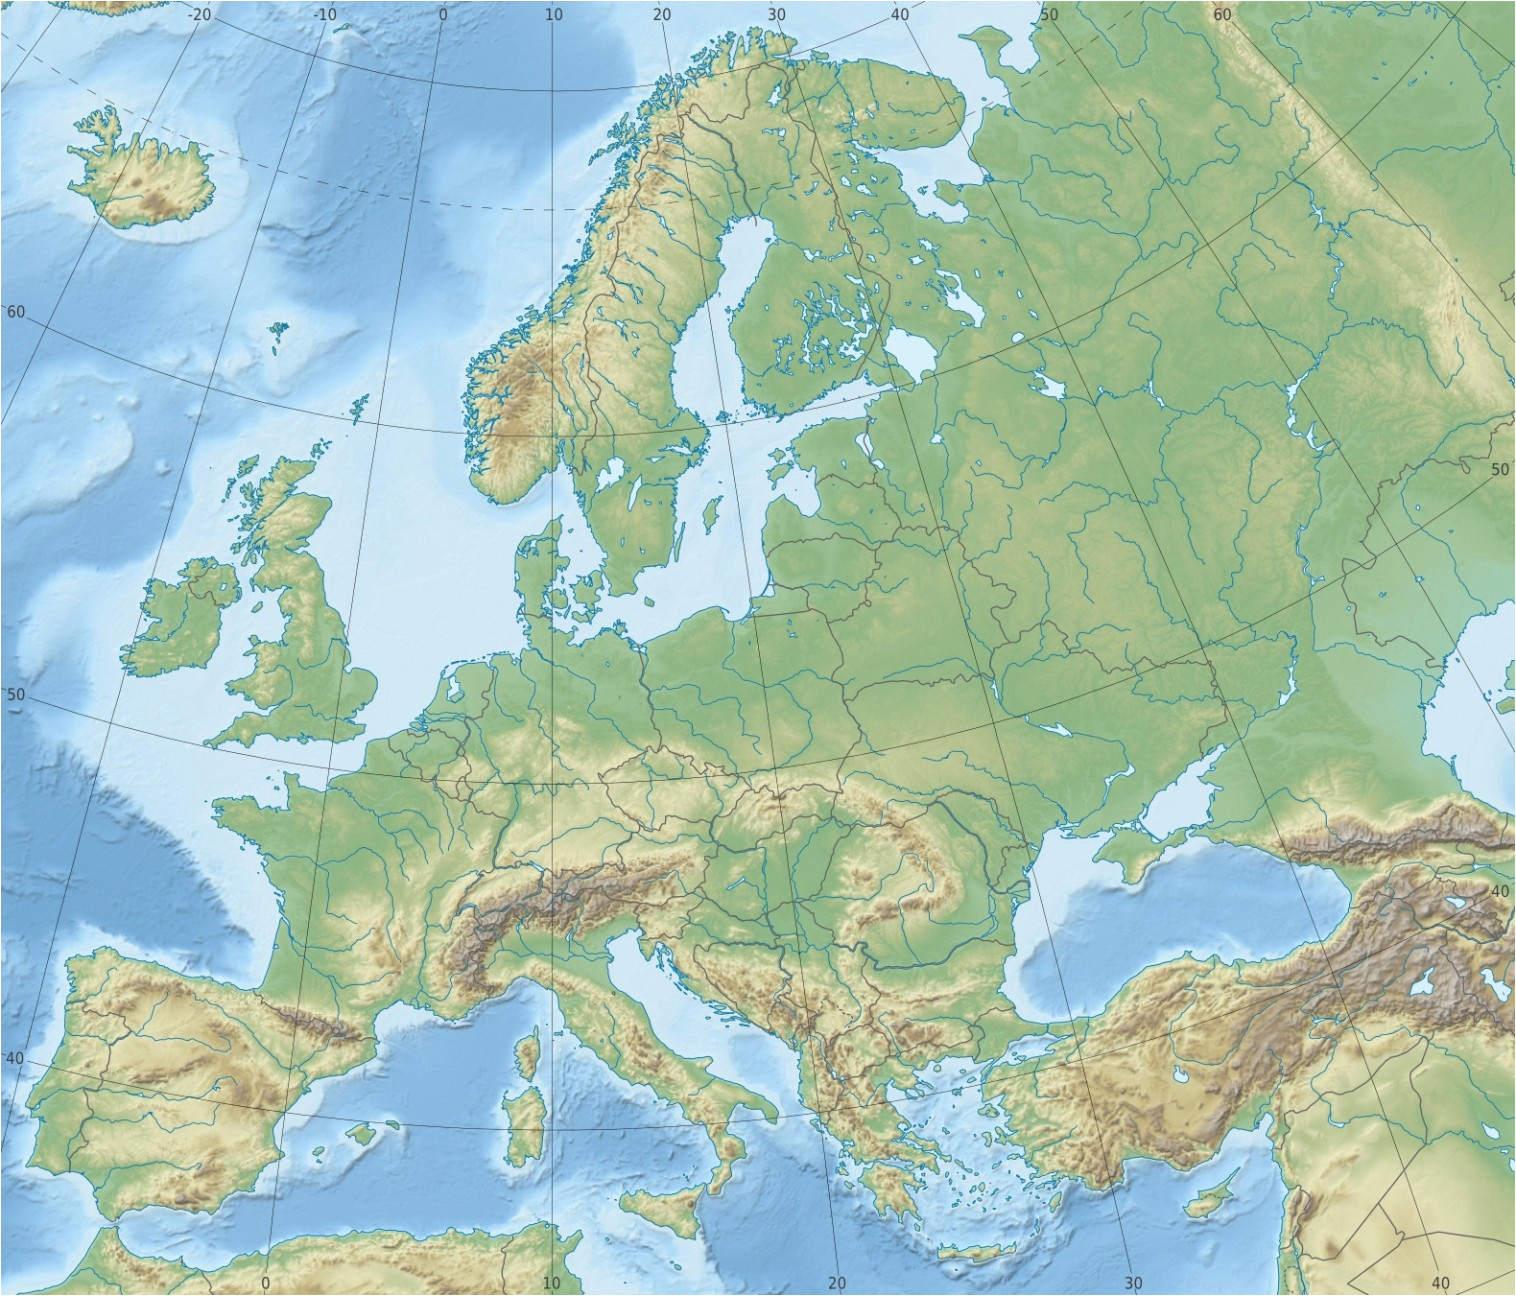 Topo Map Of Europe Europe topographic Map Climatejourney org